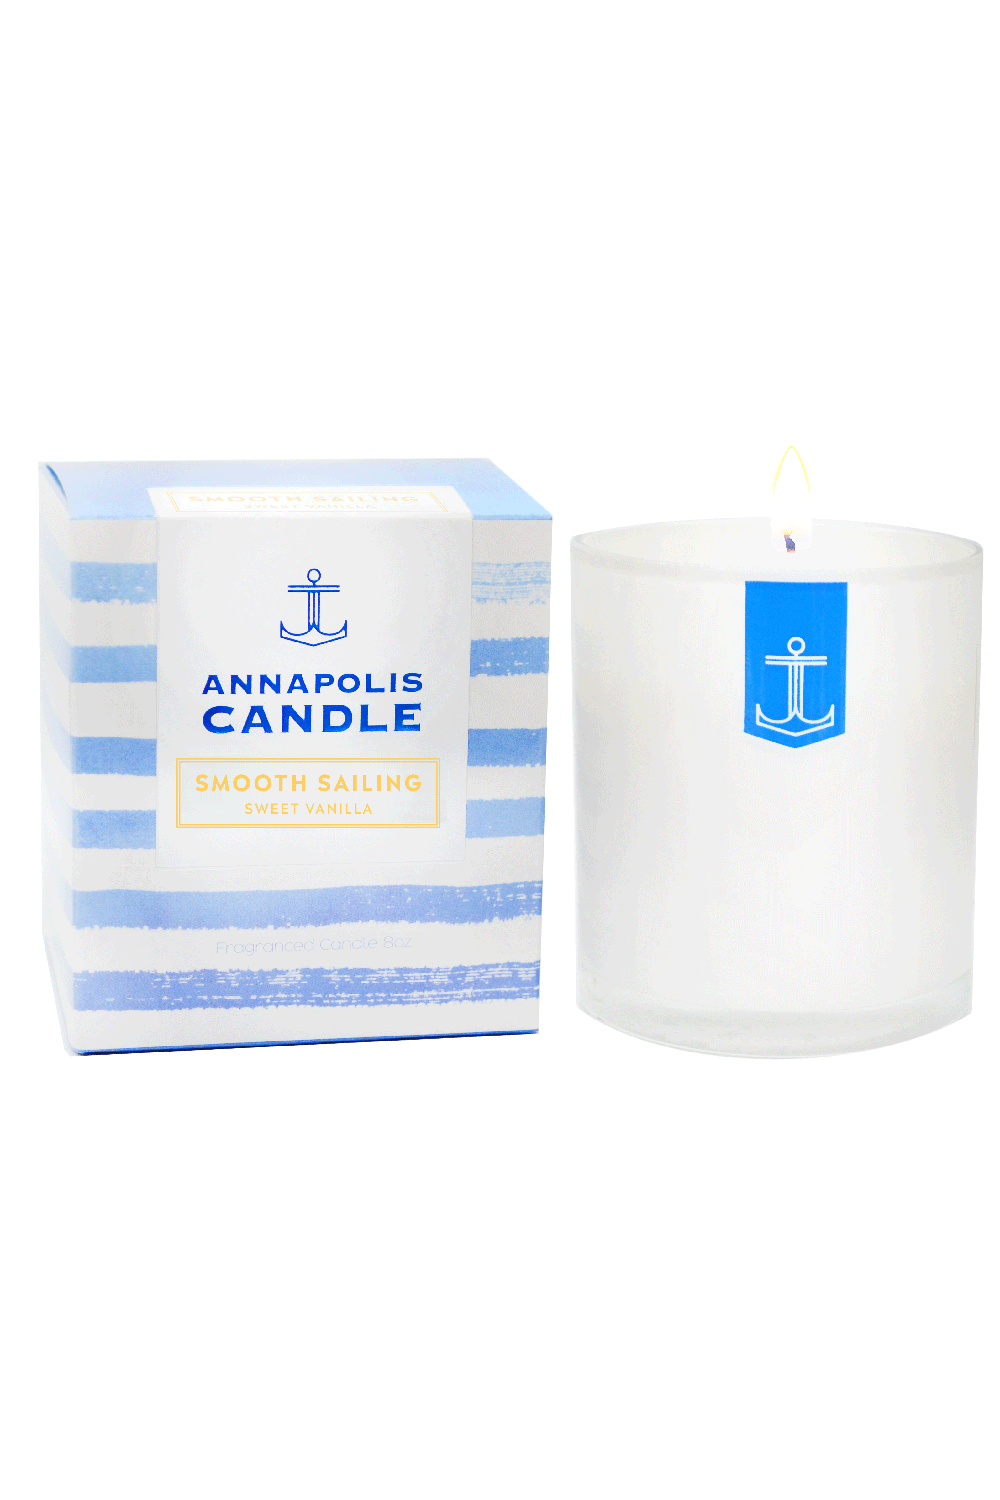 Boxed Annapolis Candle - Smooth Sailing